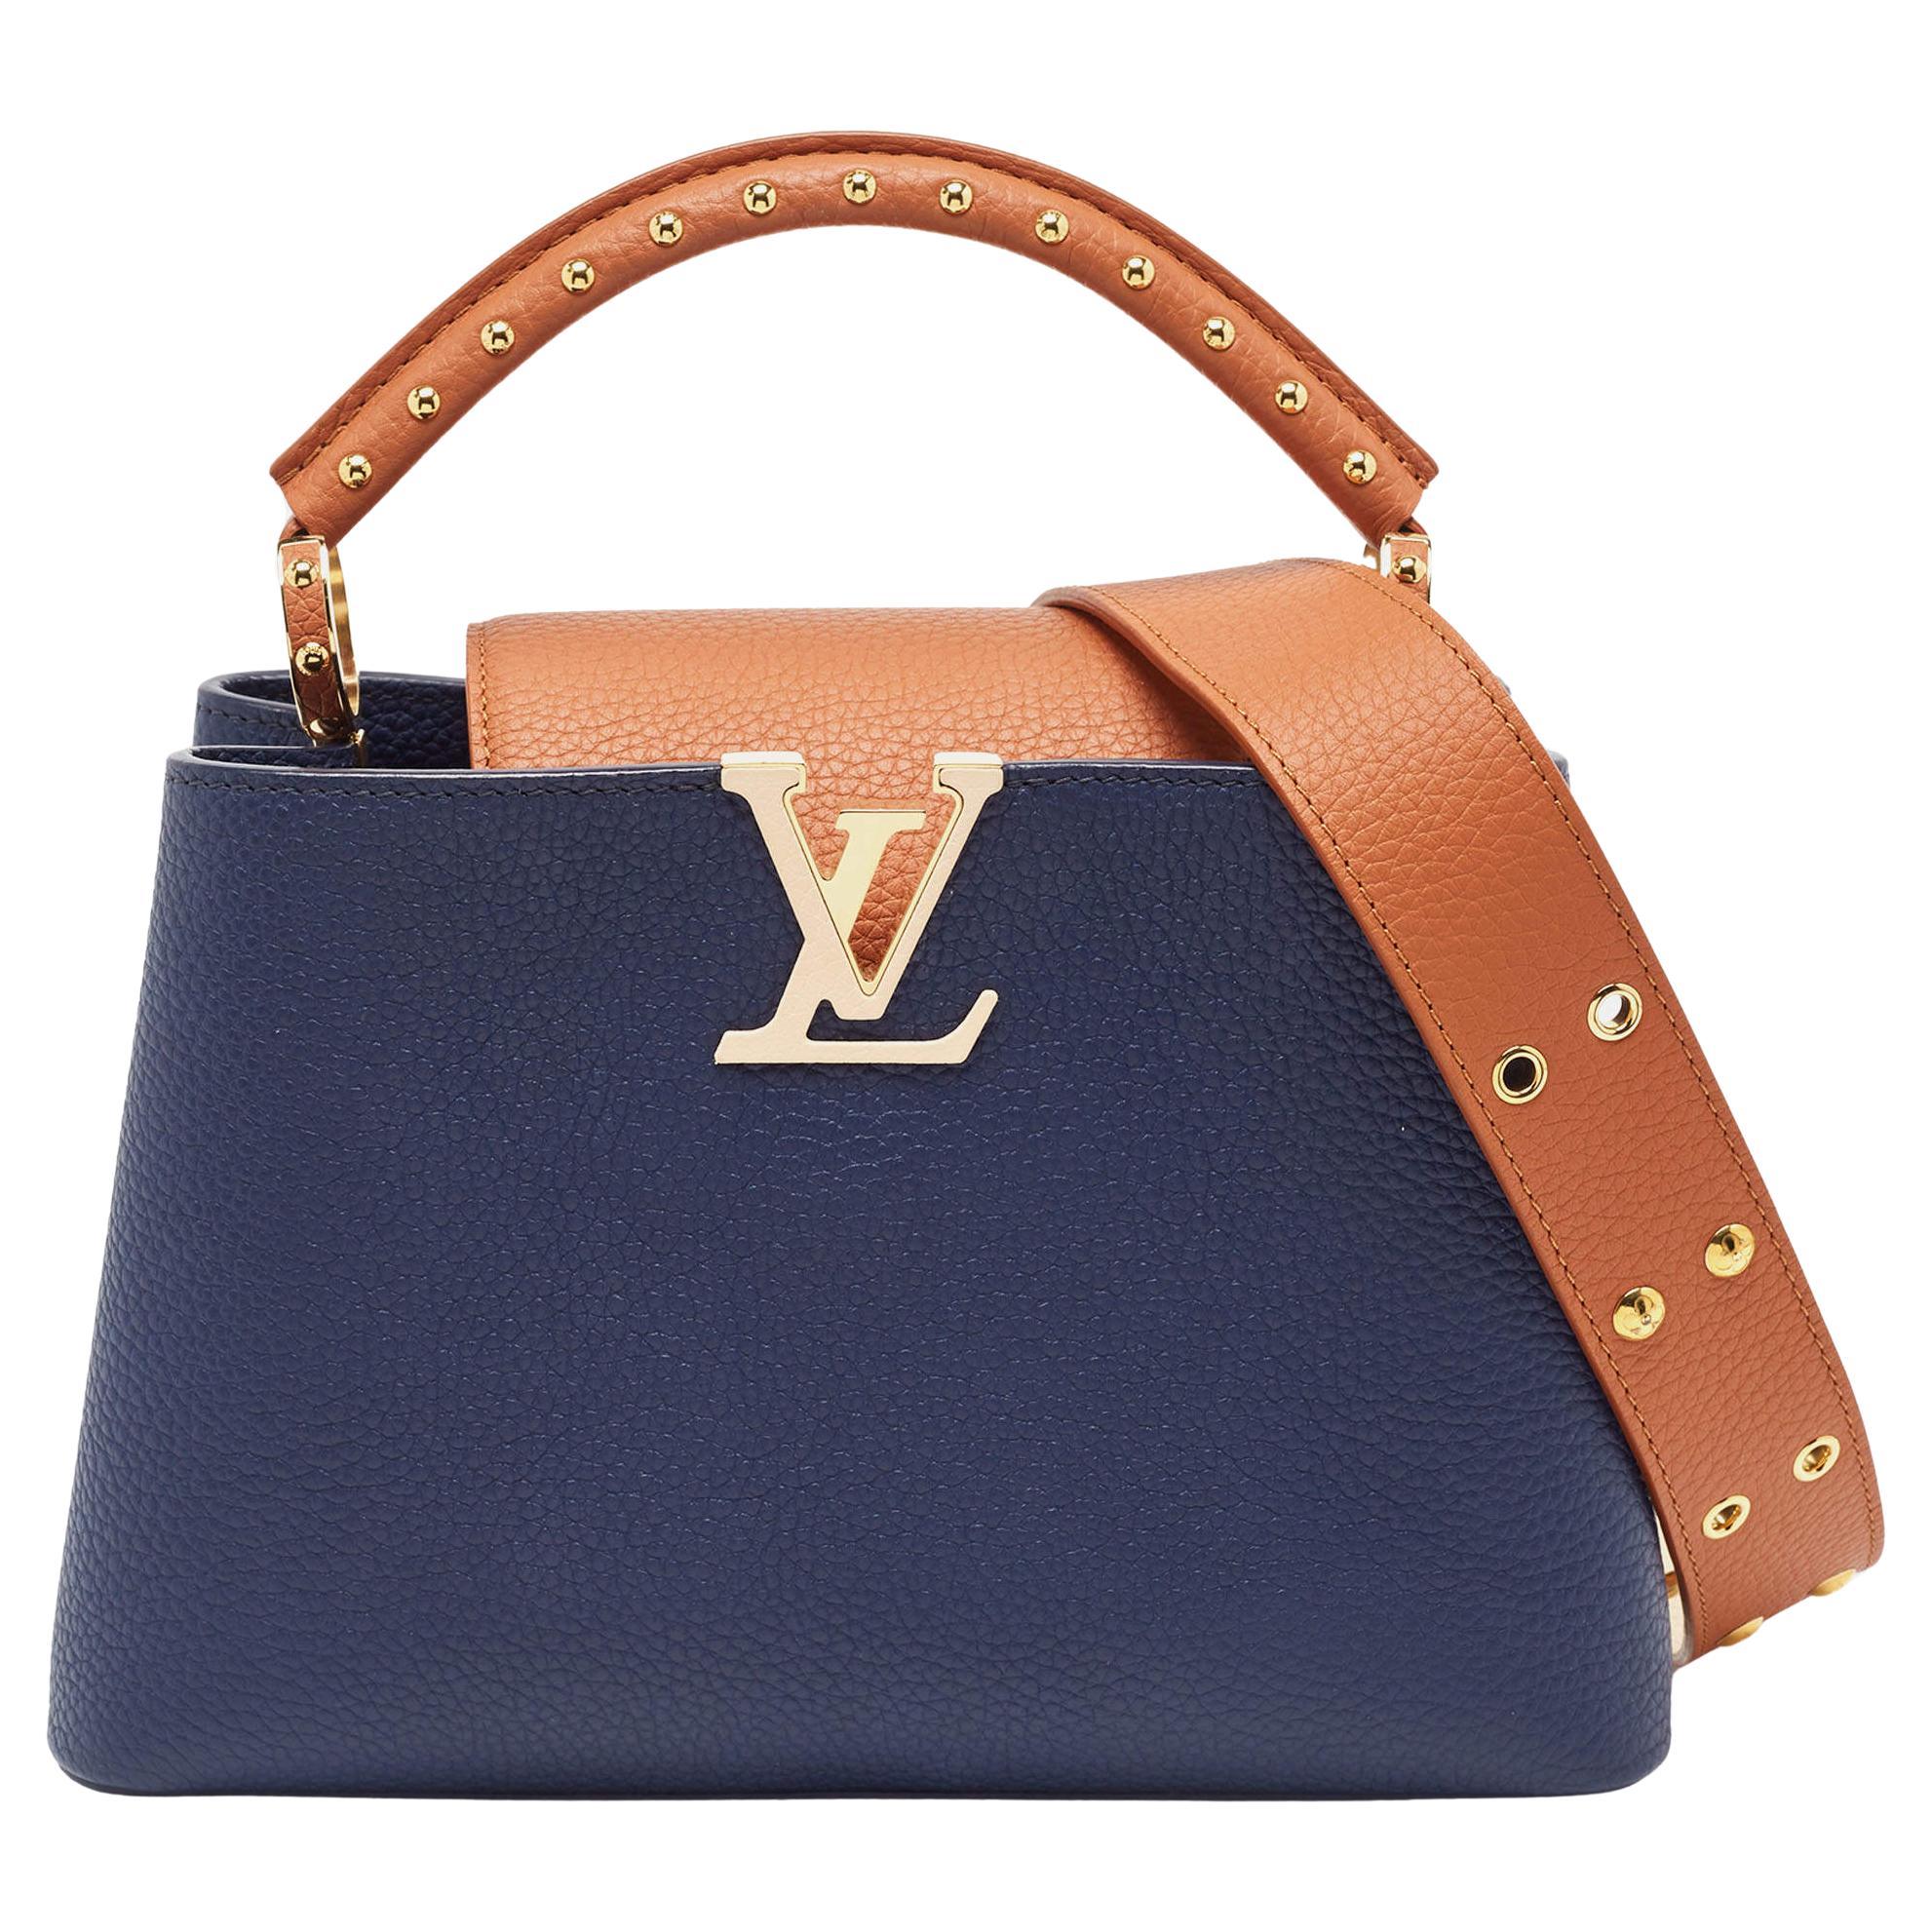 Louis Vuitton Navy Blue/Brown Leather Studded Capucines BB Bag